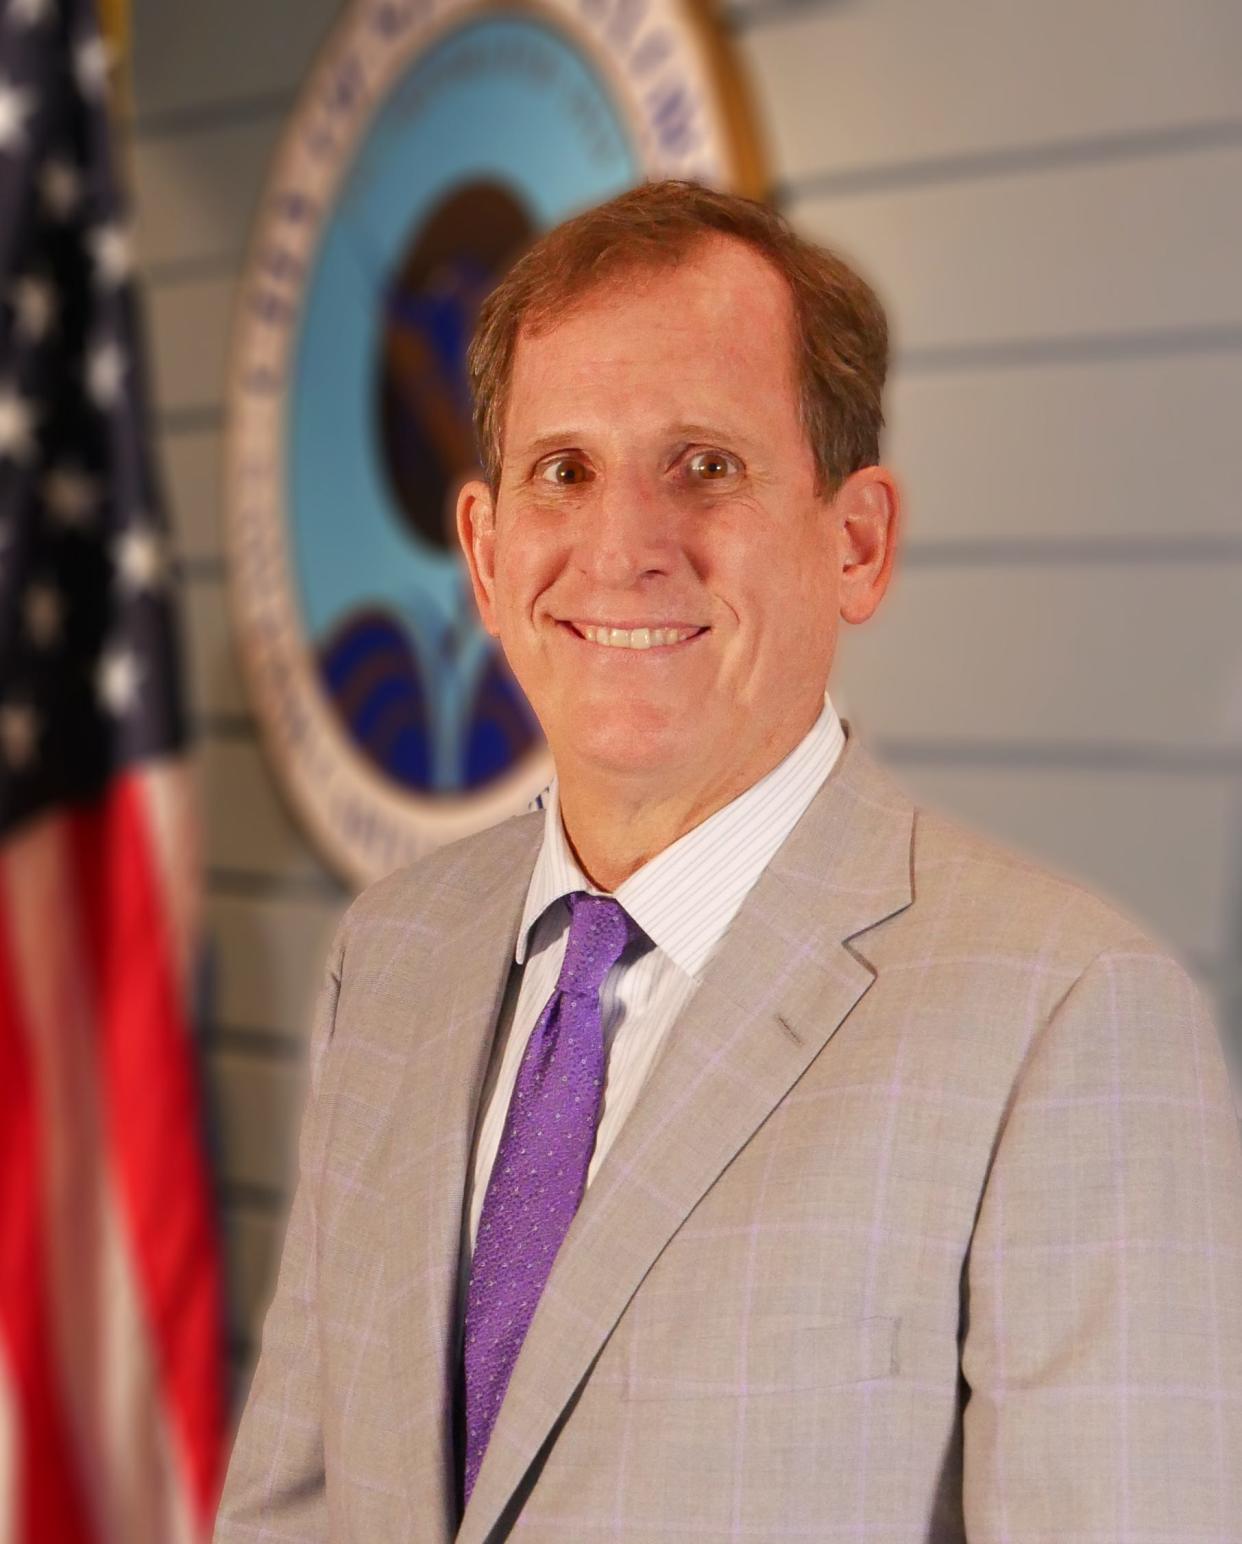 Mike Mortell, pictured, has served as Stuart mayor and city attorney. He is slated to become the city's next permanent manager after being appointed to the interim position in March 2023.